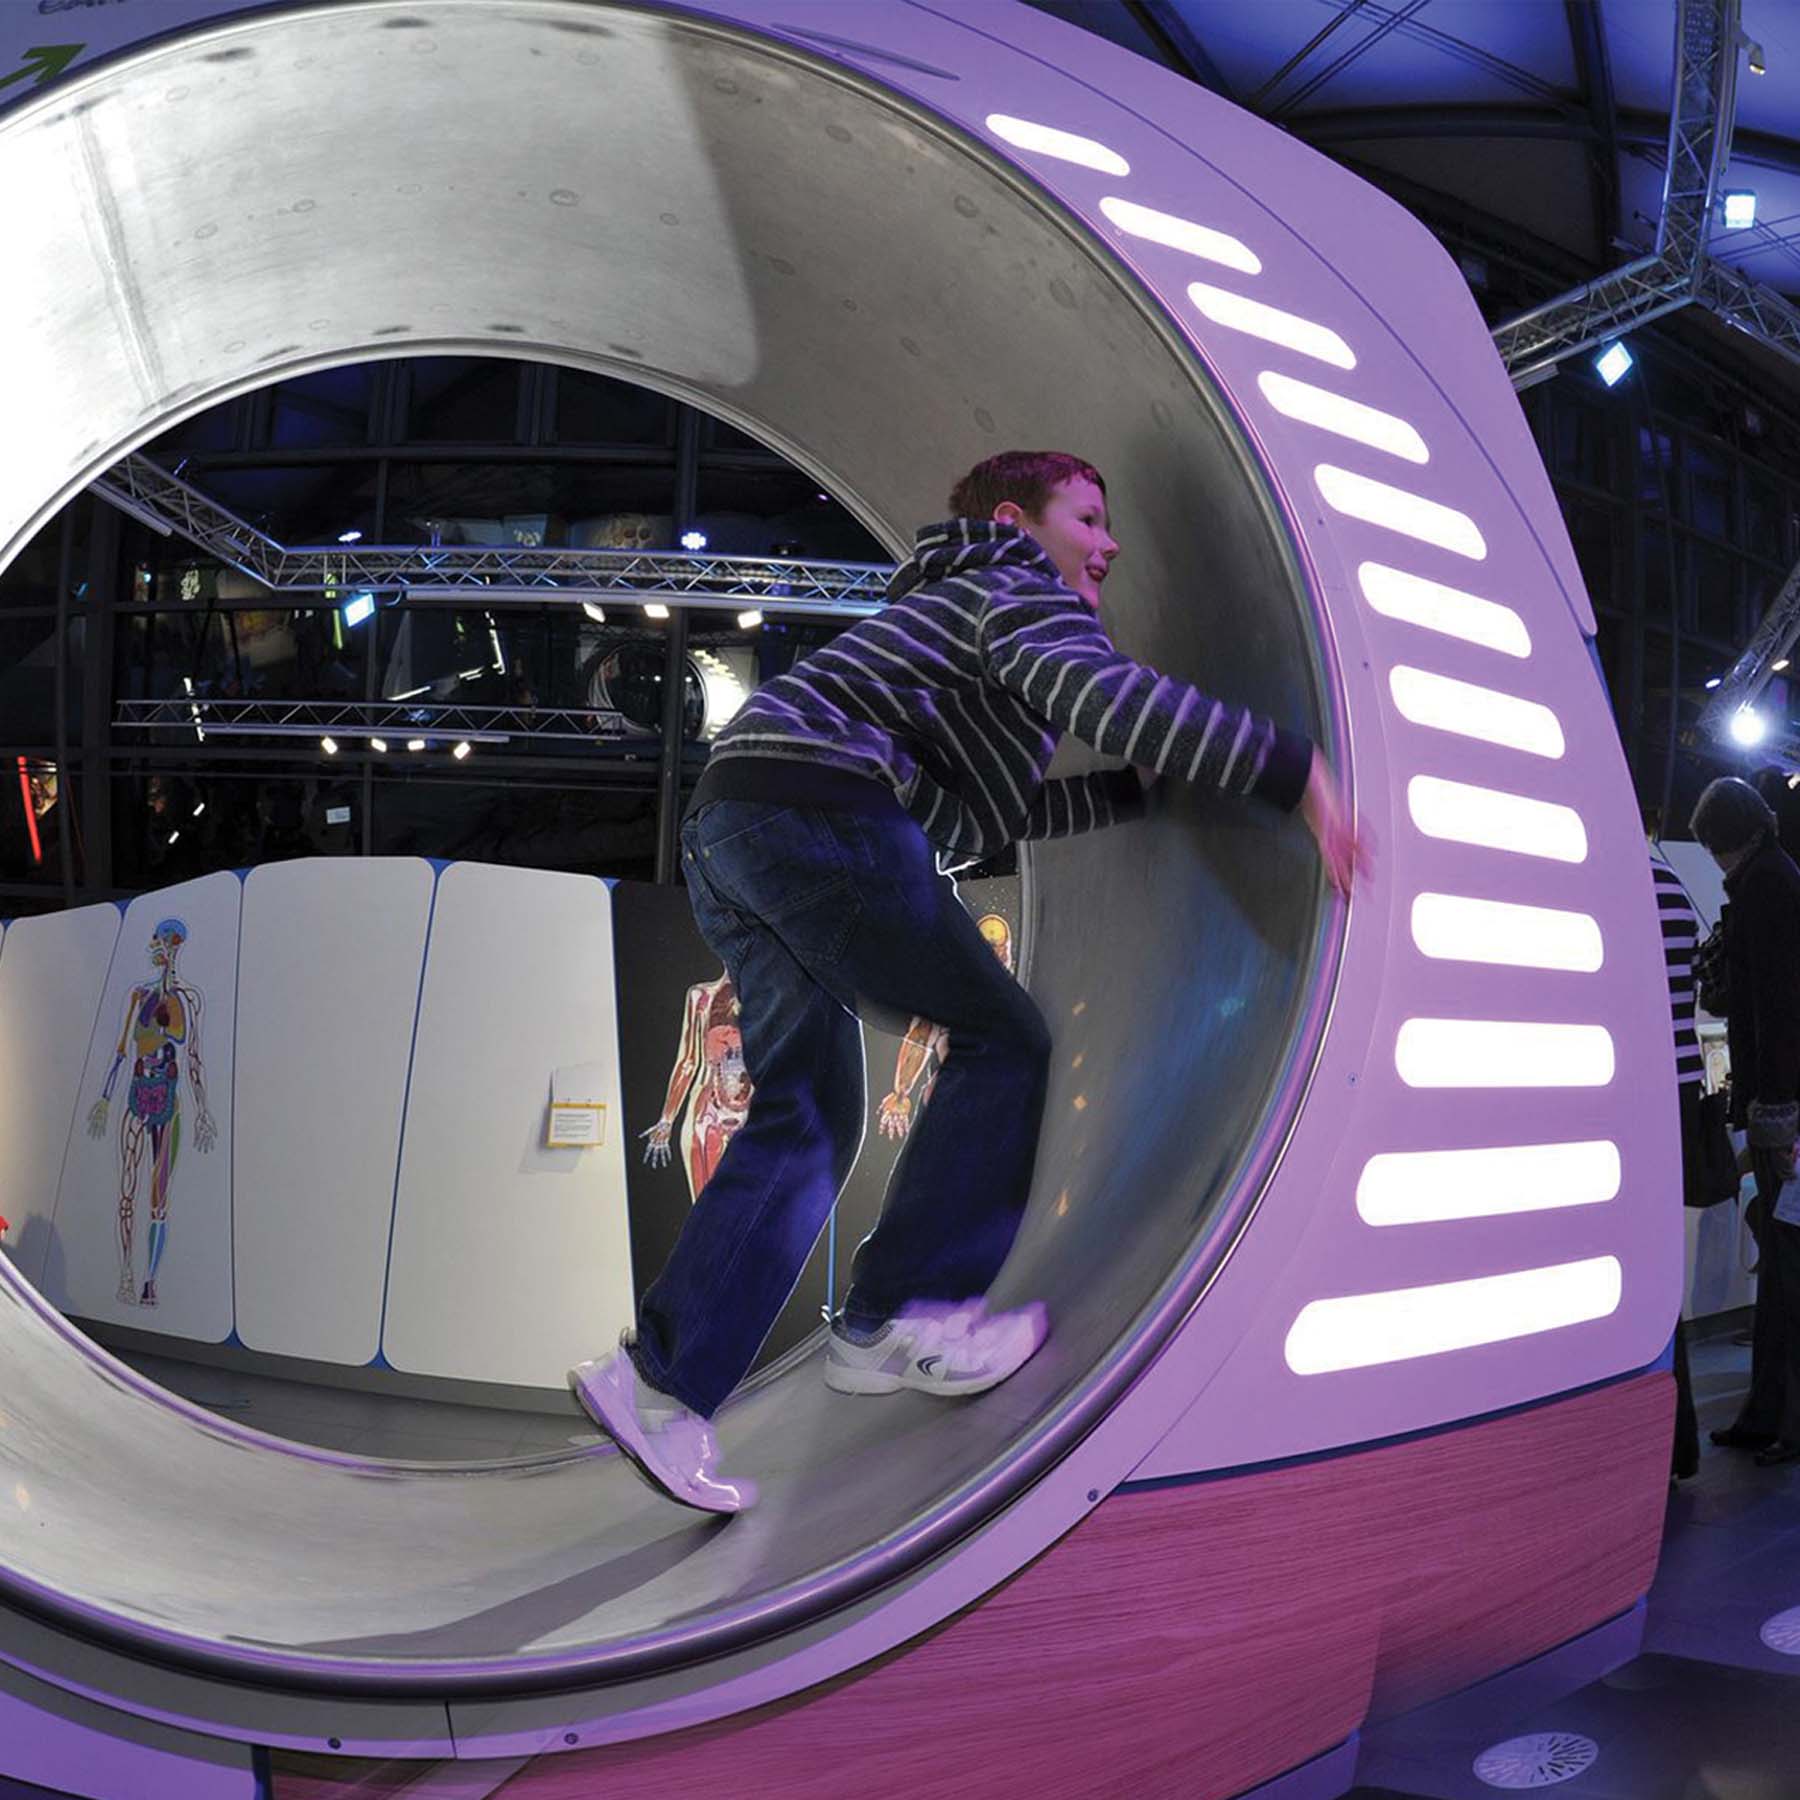 A person runs in a giant hamster wheel